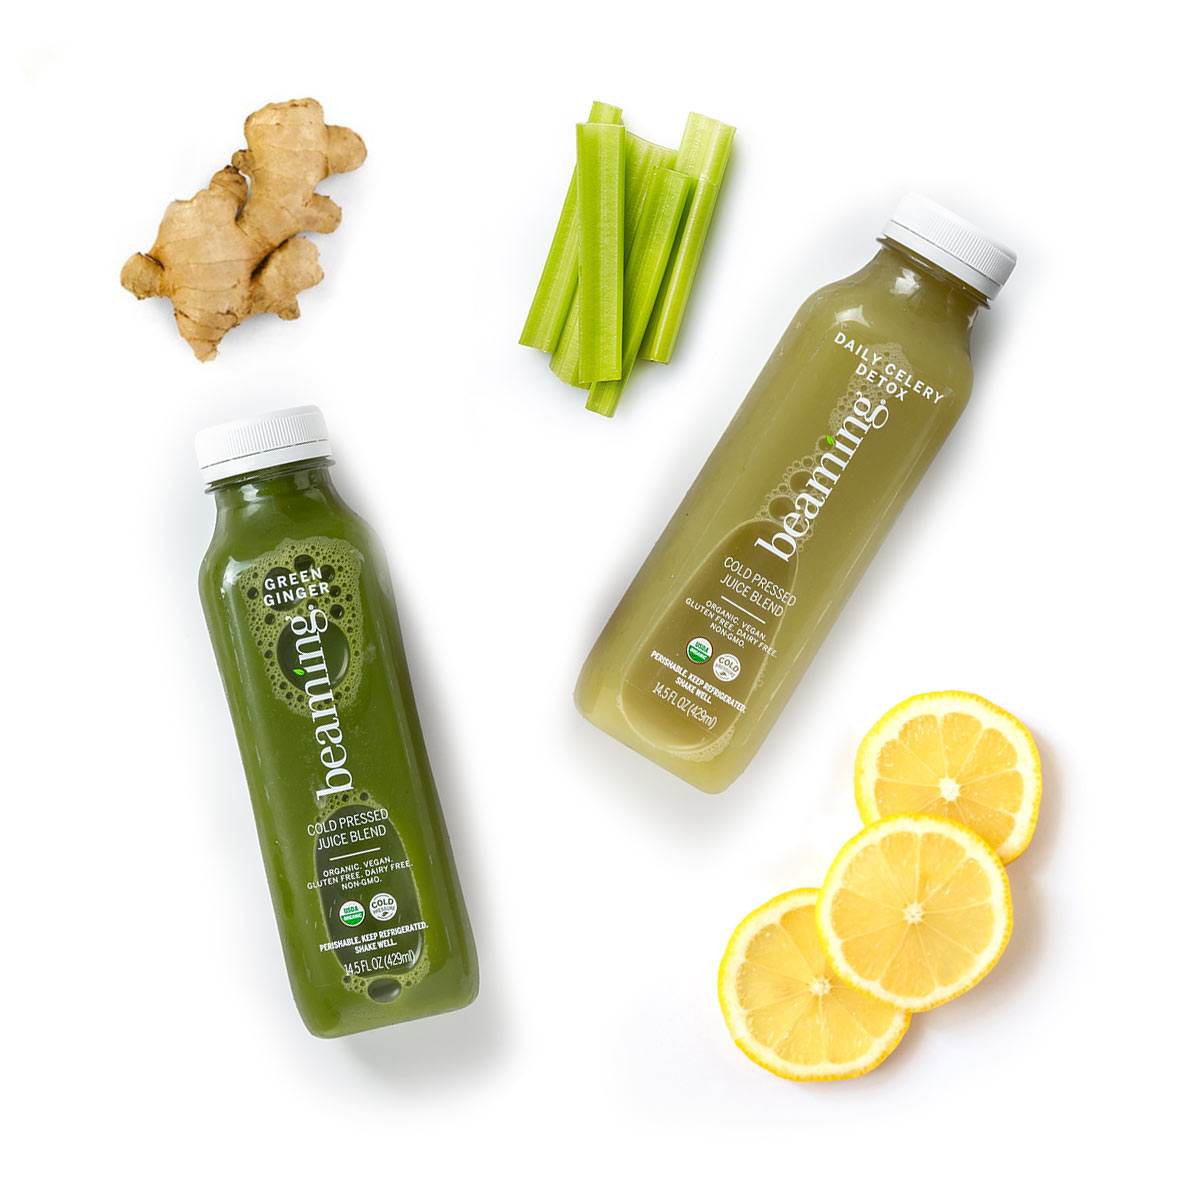 Daily Celery Detox and Green Ginger 